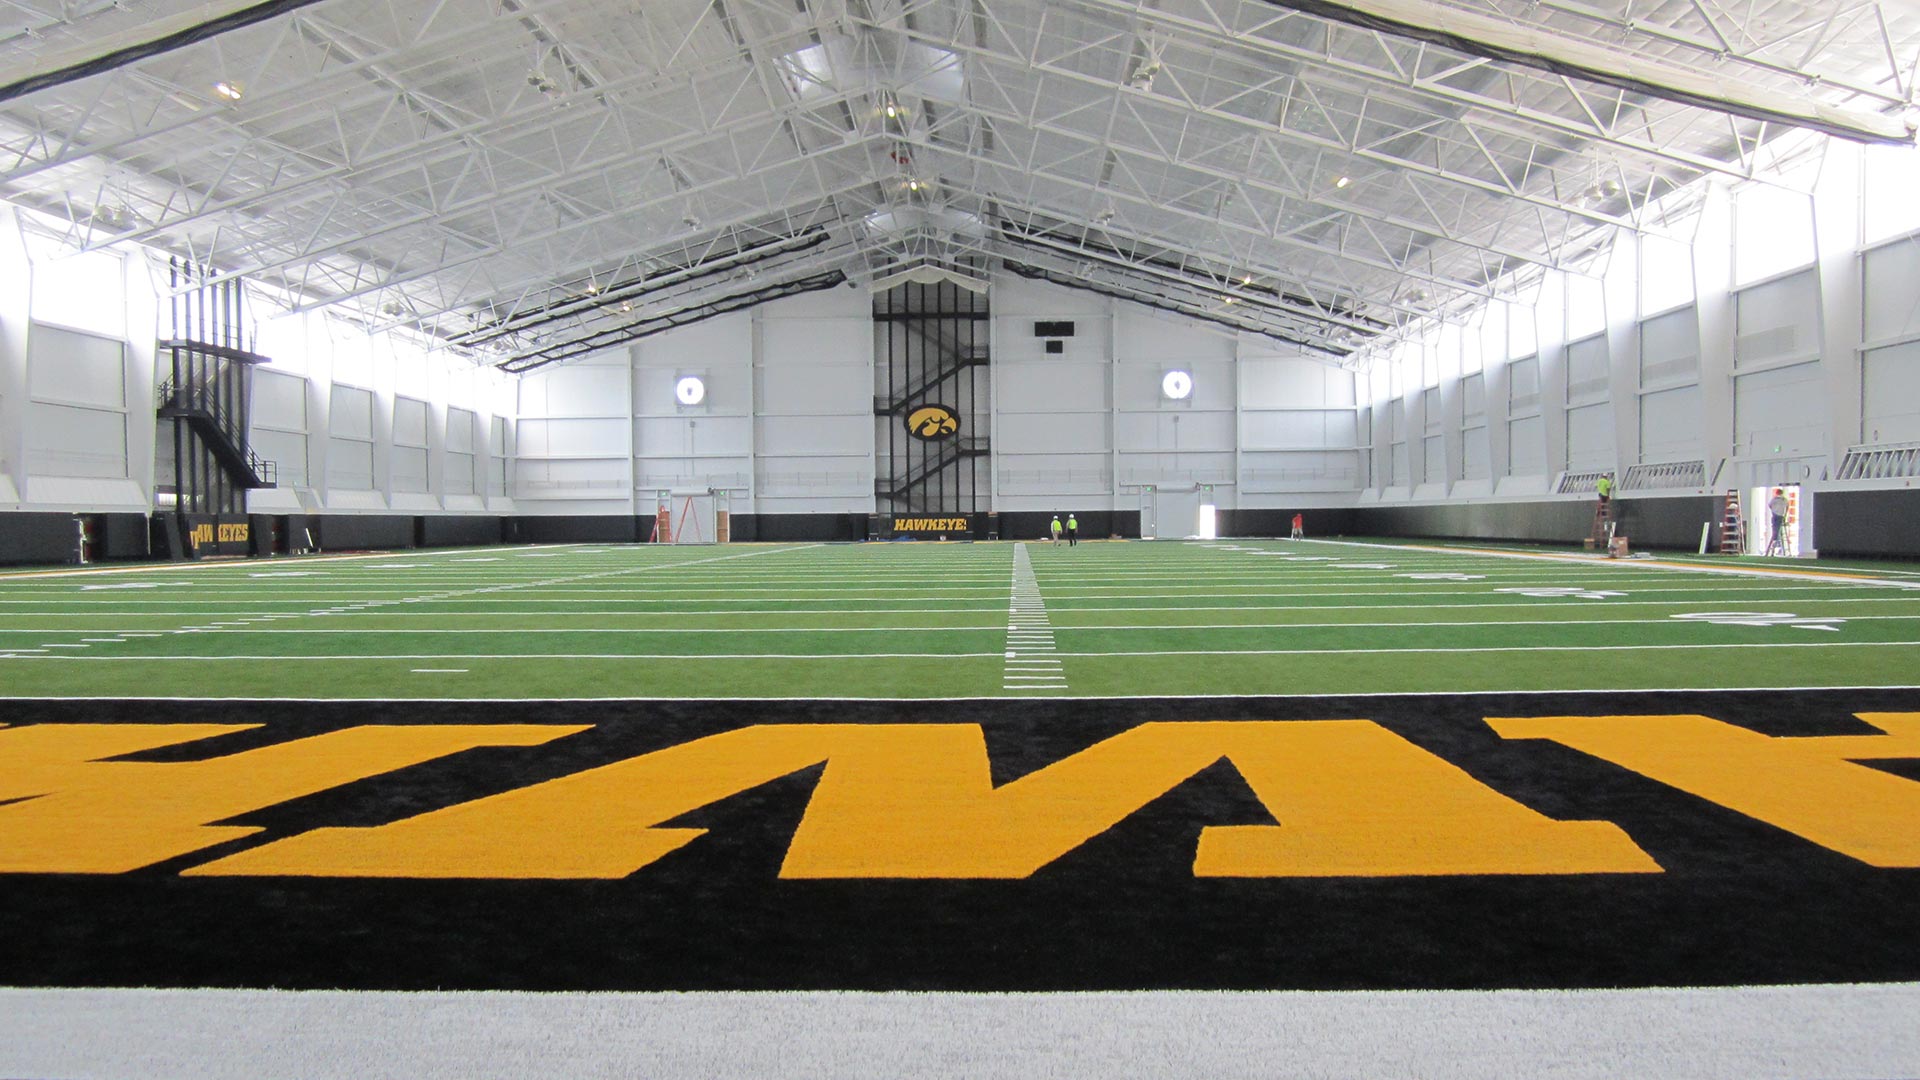 Hometown Plumbing and Heating Quad Cities Iowa Projects University of Iowa Football Indoor Practice Facility field endzone